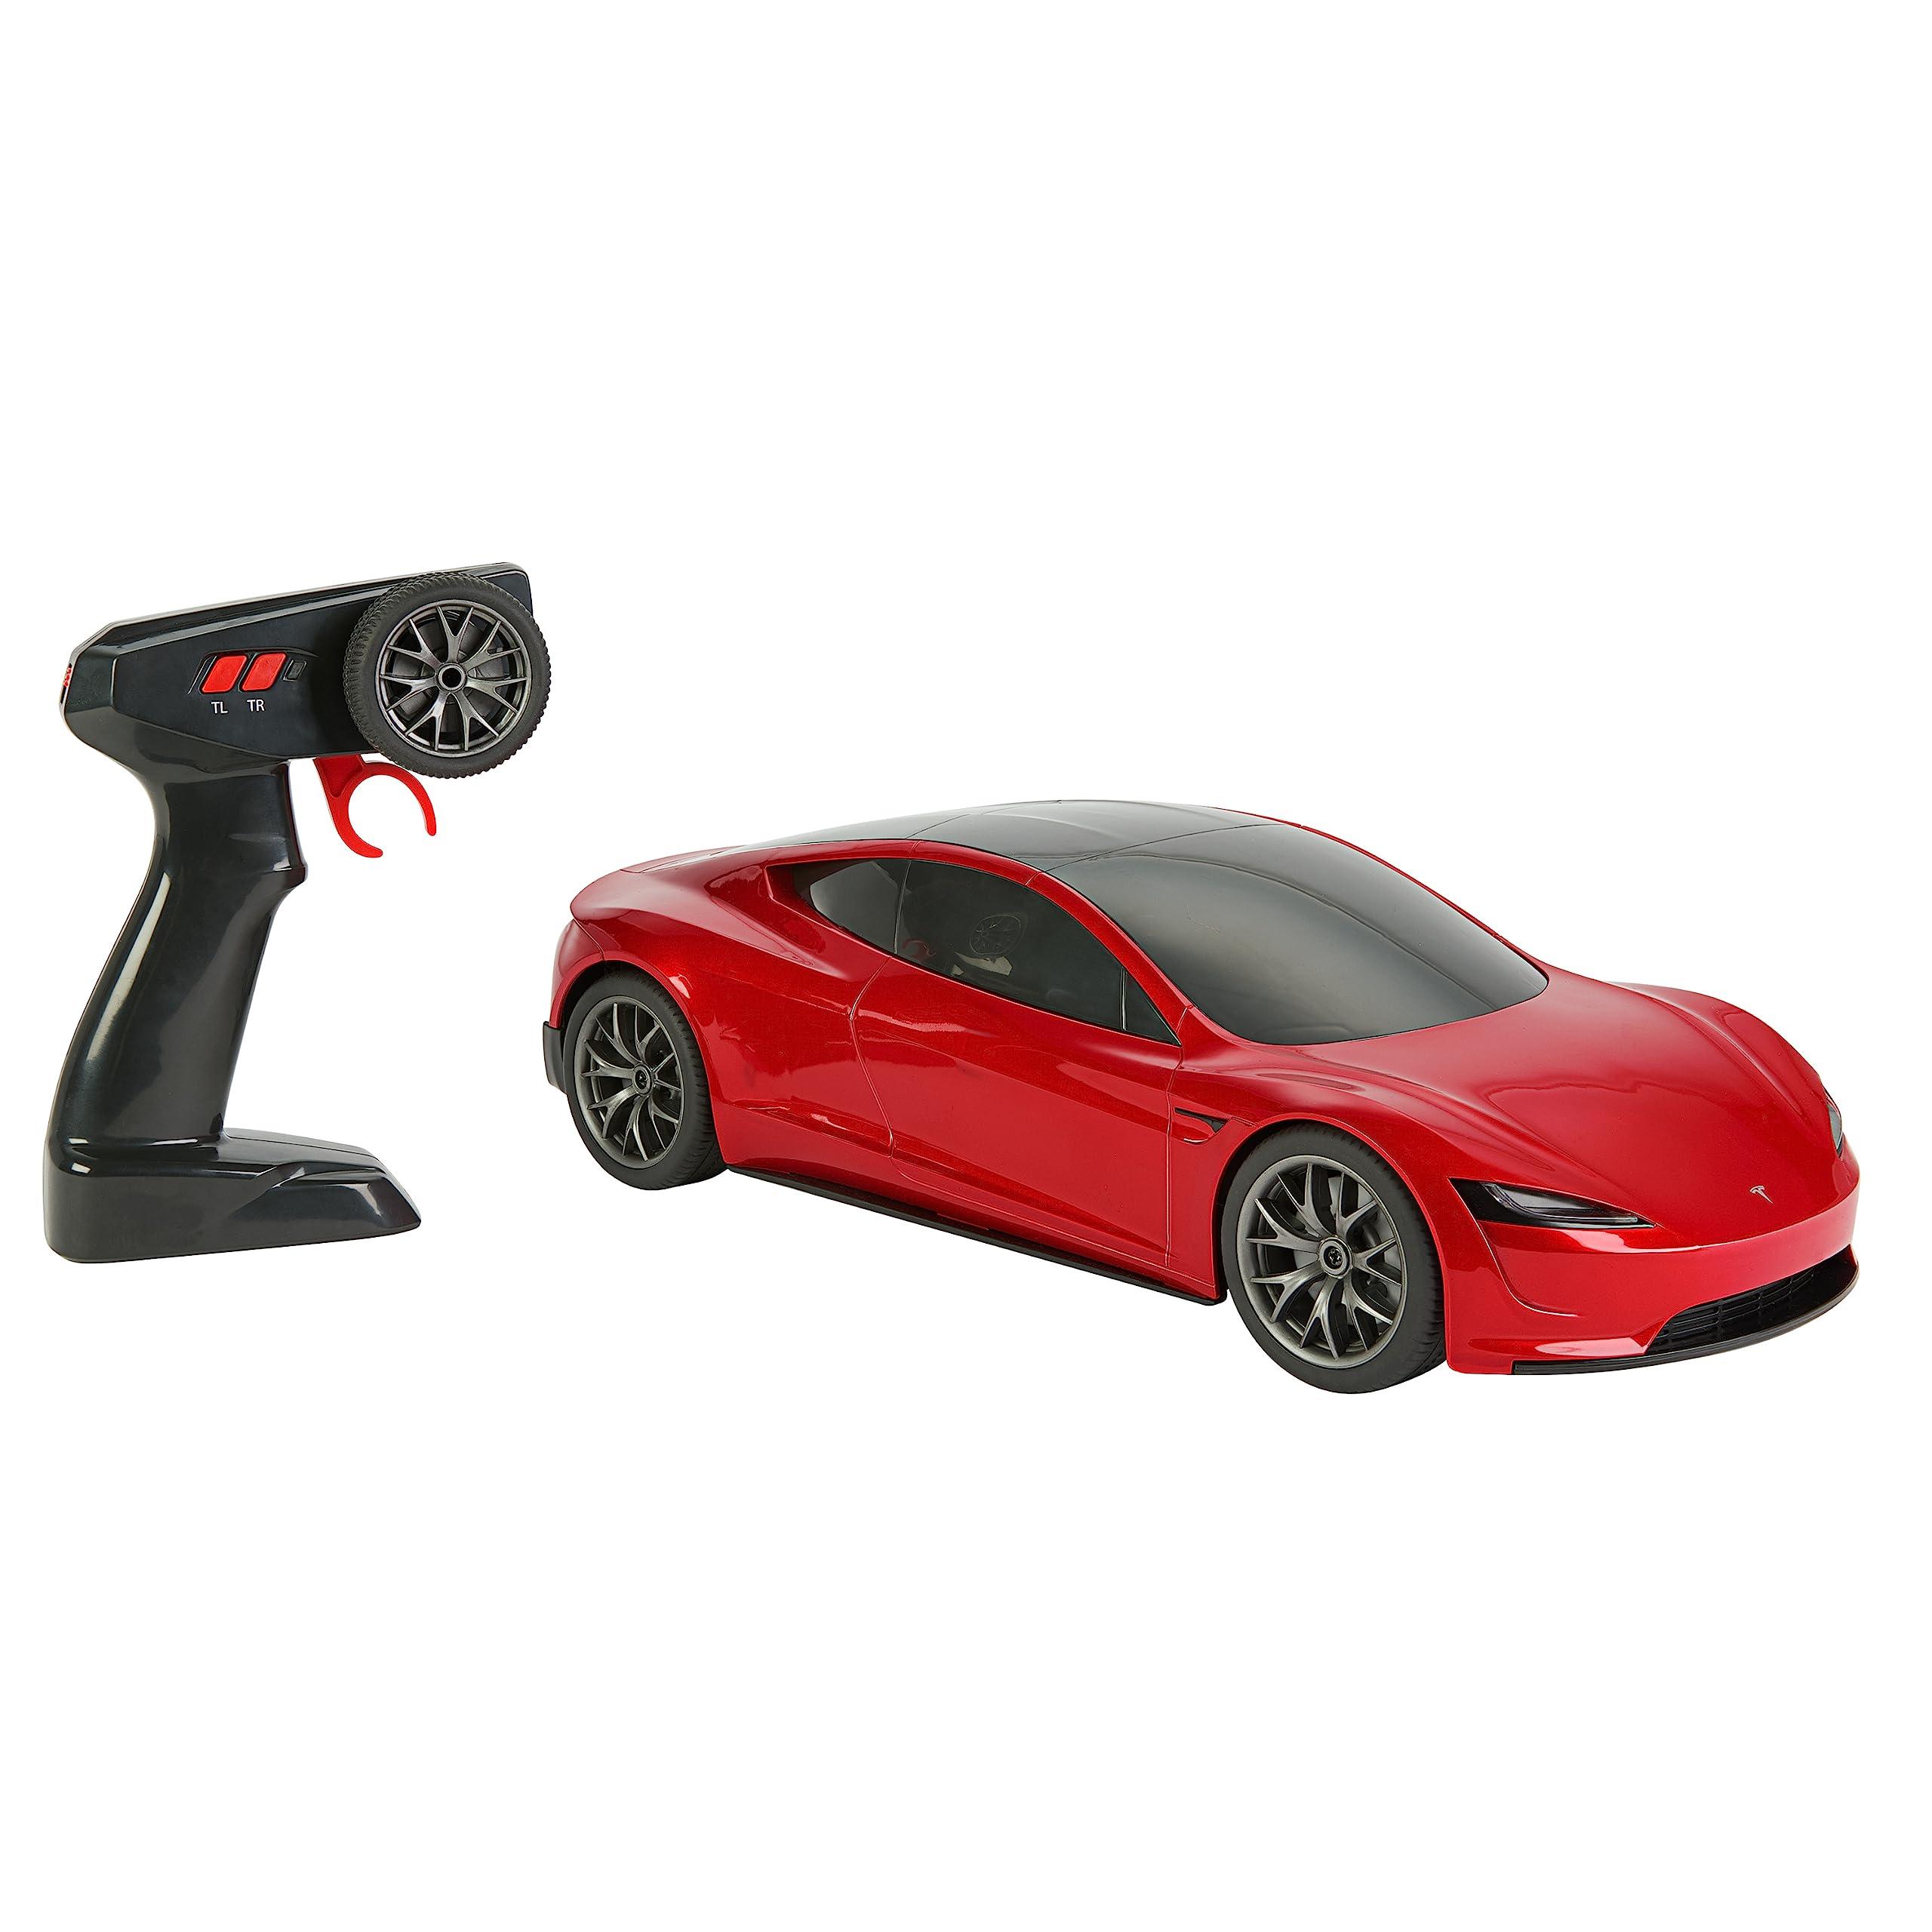 Remote Control Tesla Roadster: The Remote Revolution: How remote control technology is transforming the automotive industry